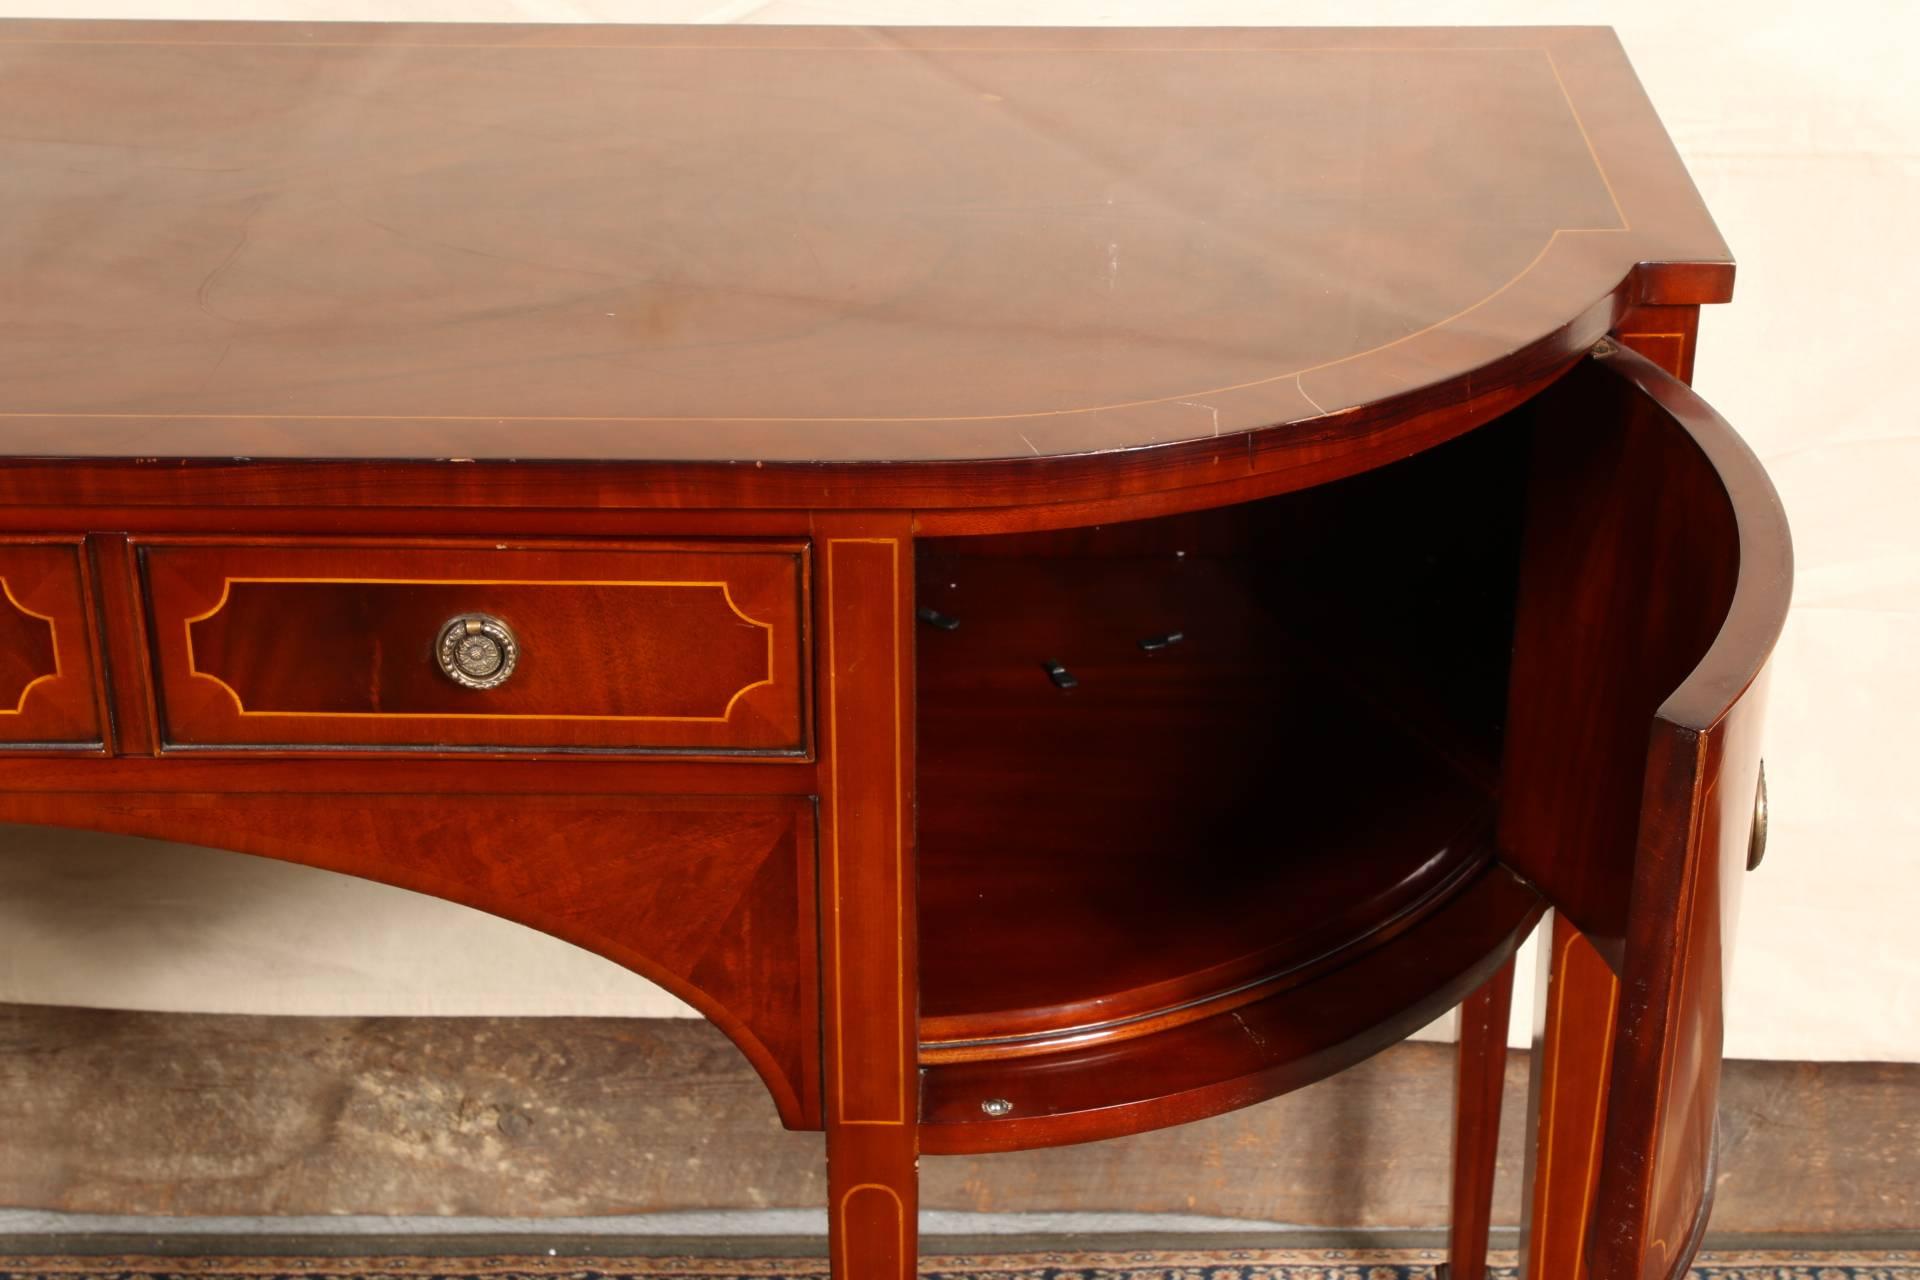 Features tonal mahogany veneer with string inlay accents, a central tri-panelled lined front drawer, two side cabinets, tapered legs and brass ring pull hardware.
Exhibits surface scratches and losses to the veneer.